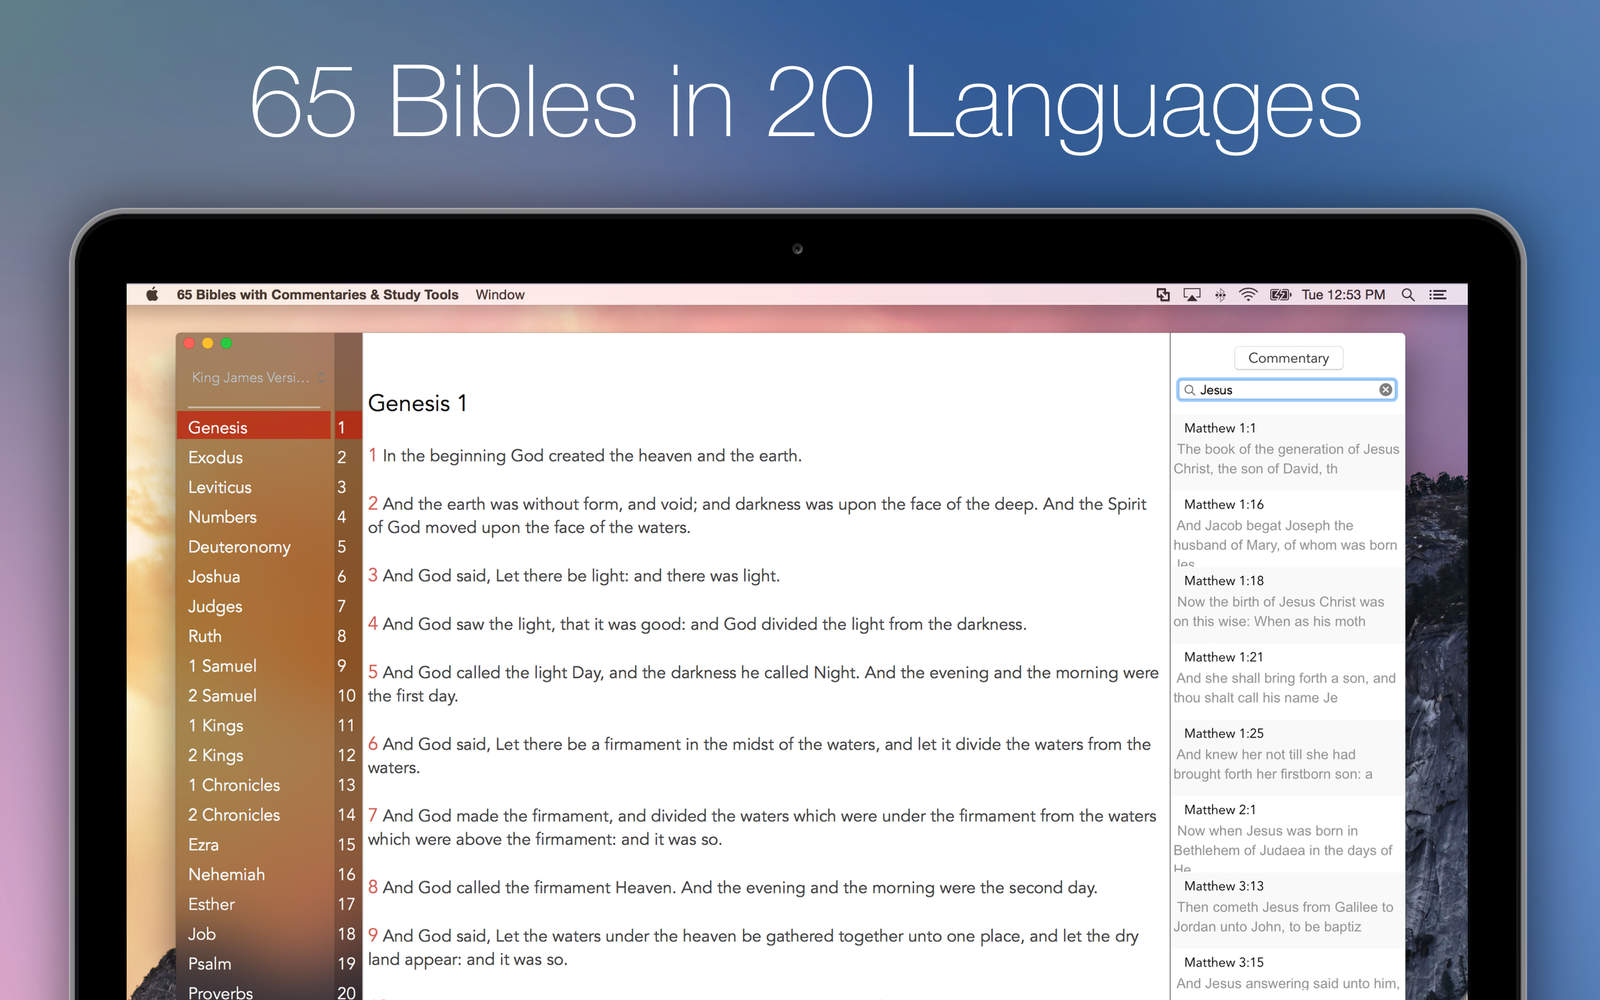 65 Bibles with Commentaries & Study Tools 1.0 : Main Window